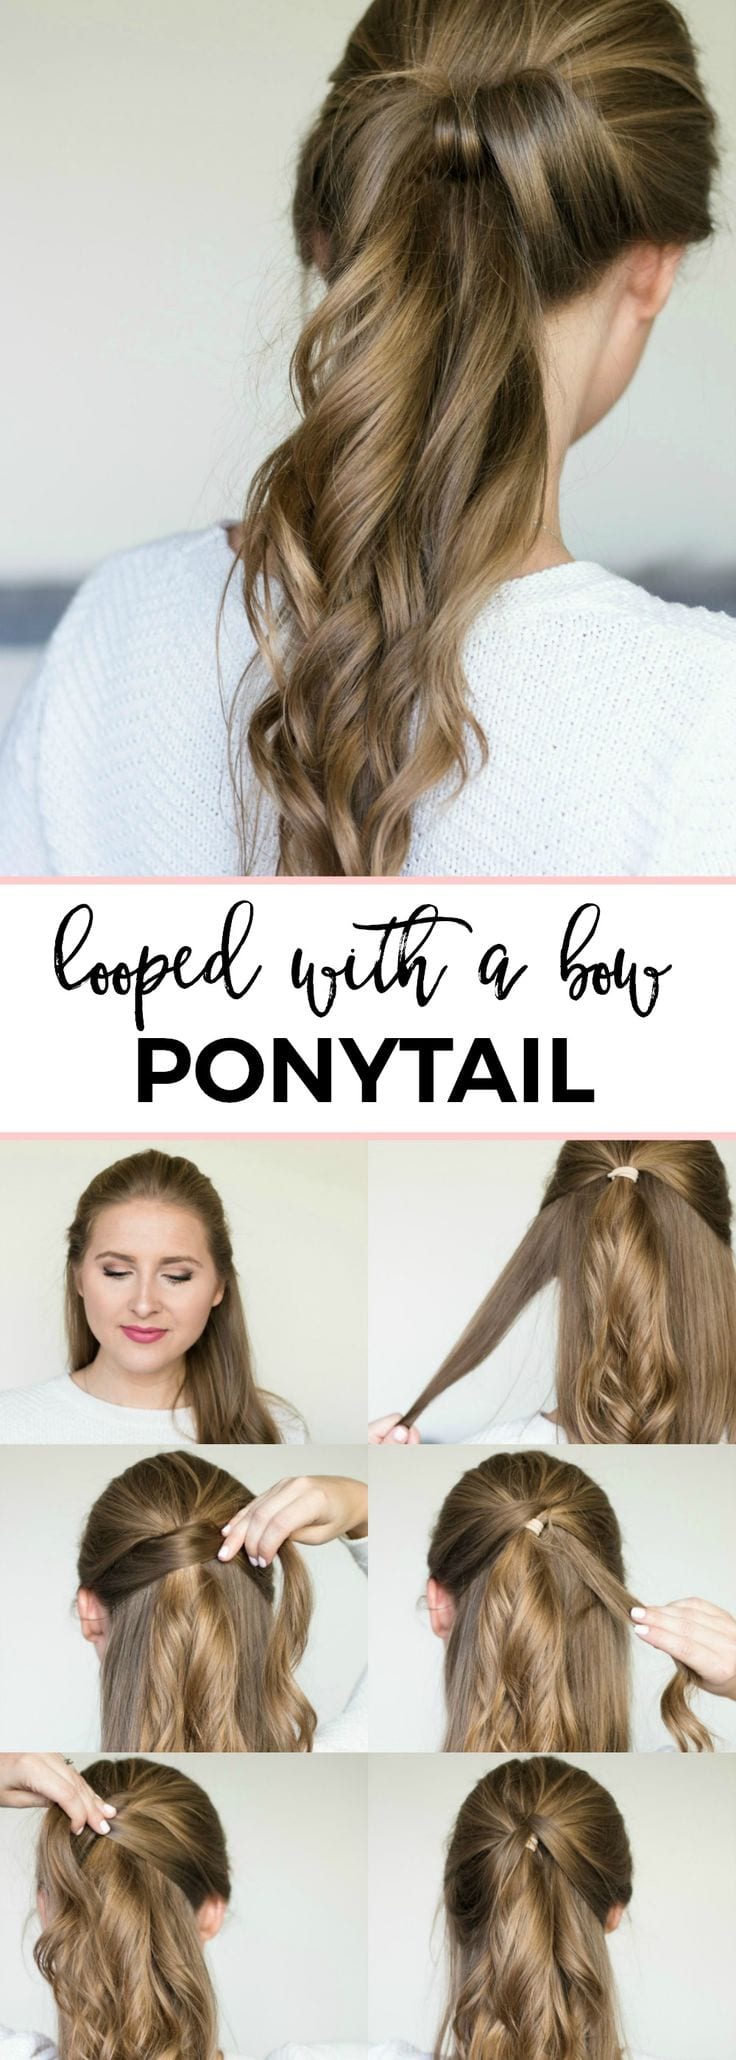 [ad_1]

Looped with a bow ponytail –  easy 5-minute hair tutorial | Fancy looped ponytail with loose waves hair tutorial | Quick and easy, no-heat hairstyle tutorials with beauty blogger Ashley Brooke Nicholas + the best shampoo and conditioner for…